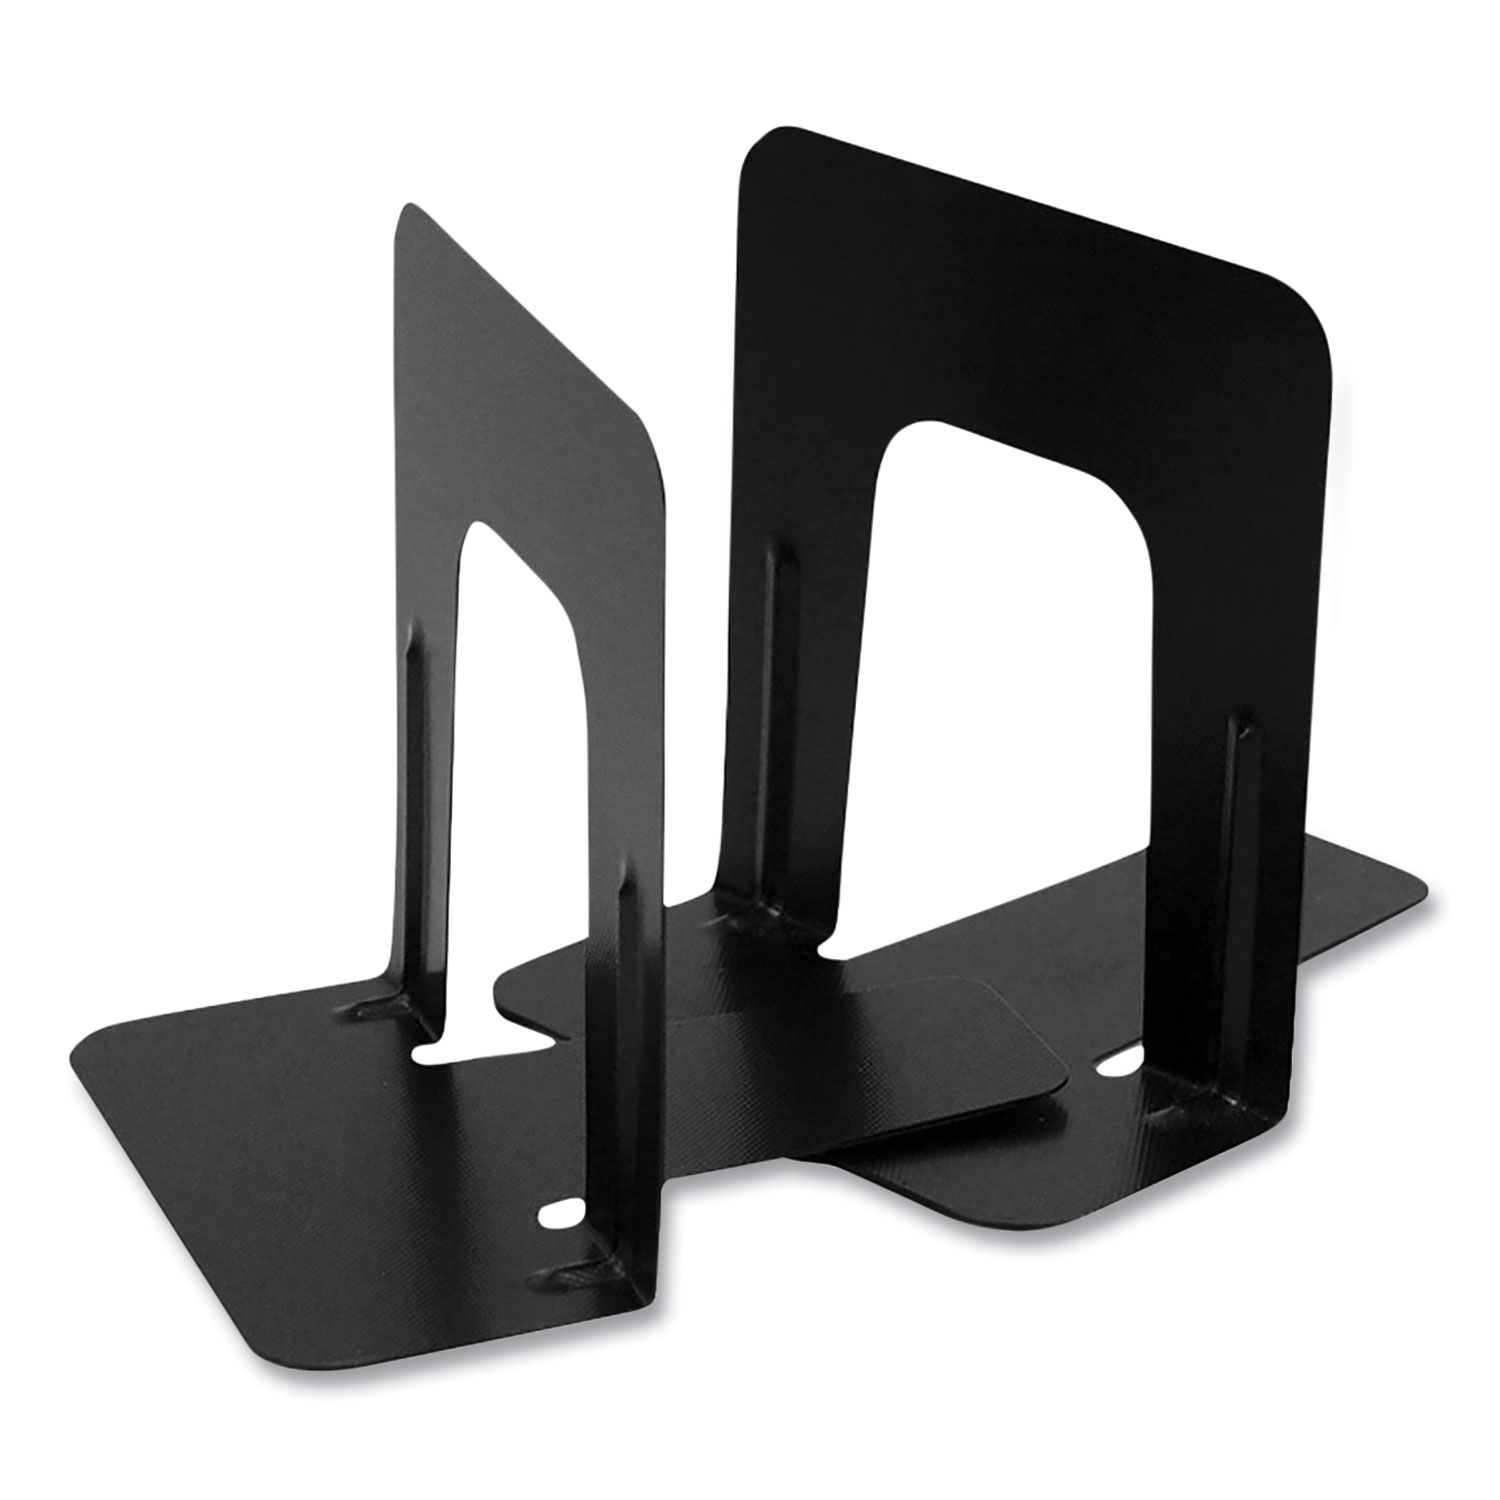  Officemate OIC93001 Steel Bookends, Nonskid, 4.75 x 5.13 x 5, Black (OIC24451752) 